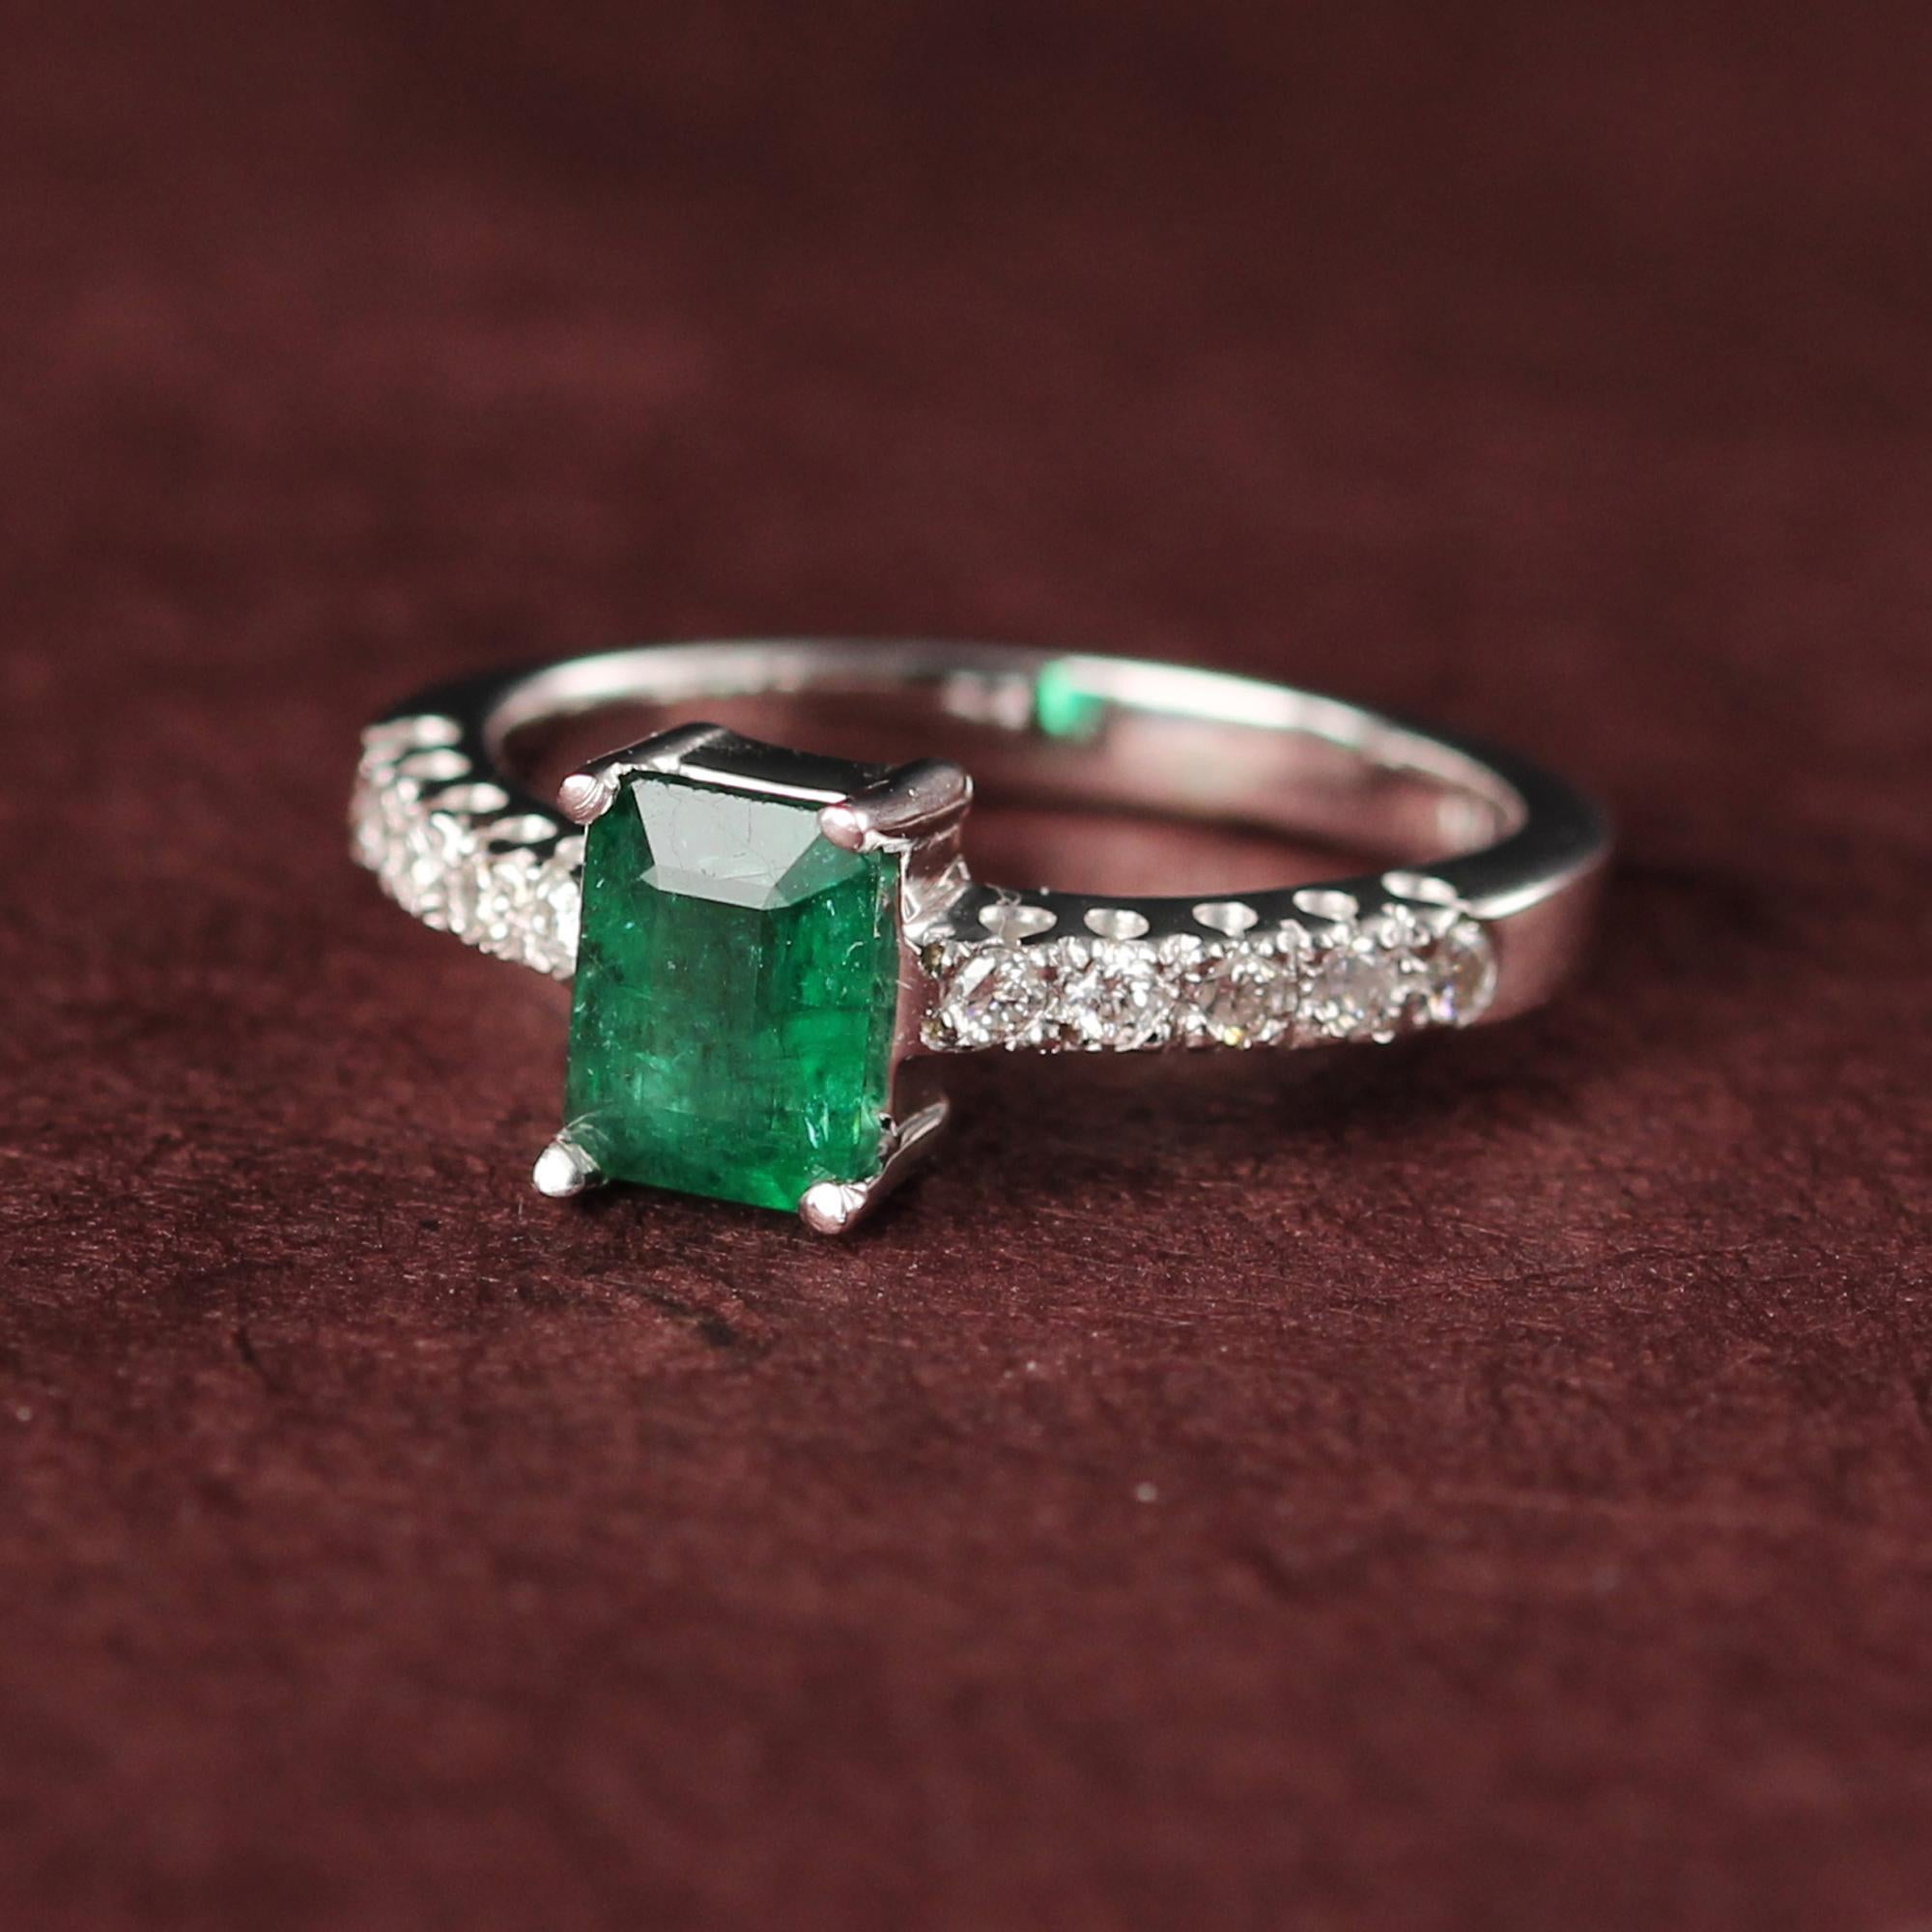 Classic Emerald gemstone - emerald-cut shape Ring
Plus white Gold and Diamonds 
Total Emerald 0.80 carat. (7 x 5 mm) 
Nice Green Color and has natural inclusions
Total Diamonds 0.20 carat G-VS
Total Gold 14K White Gold 3.30 Grams.
Finger Size